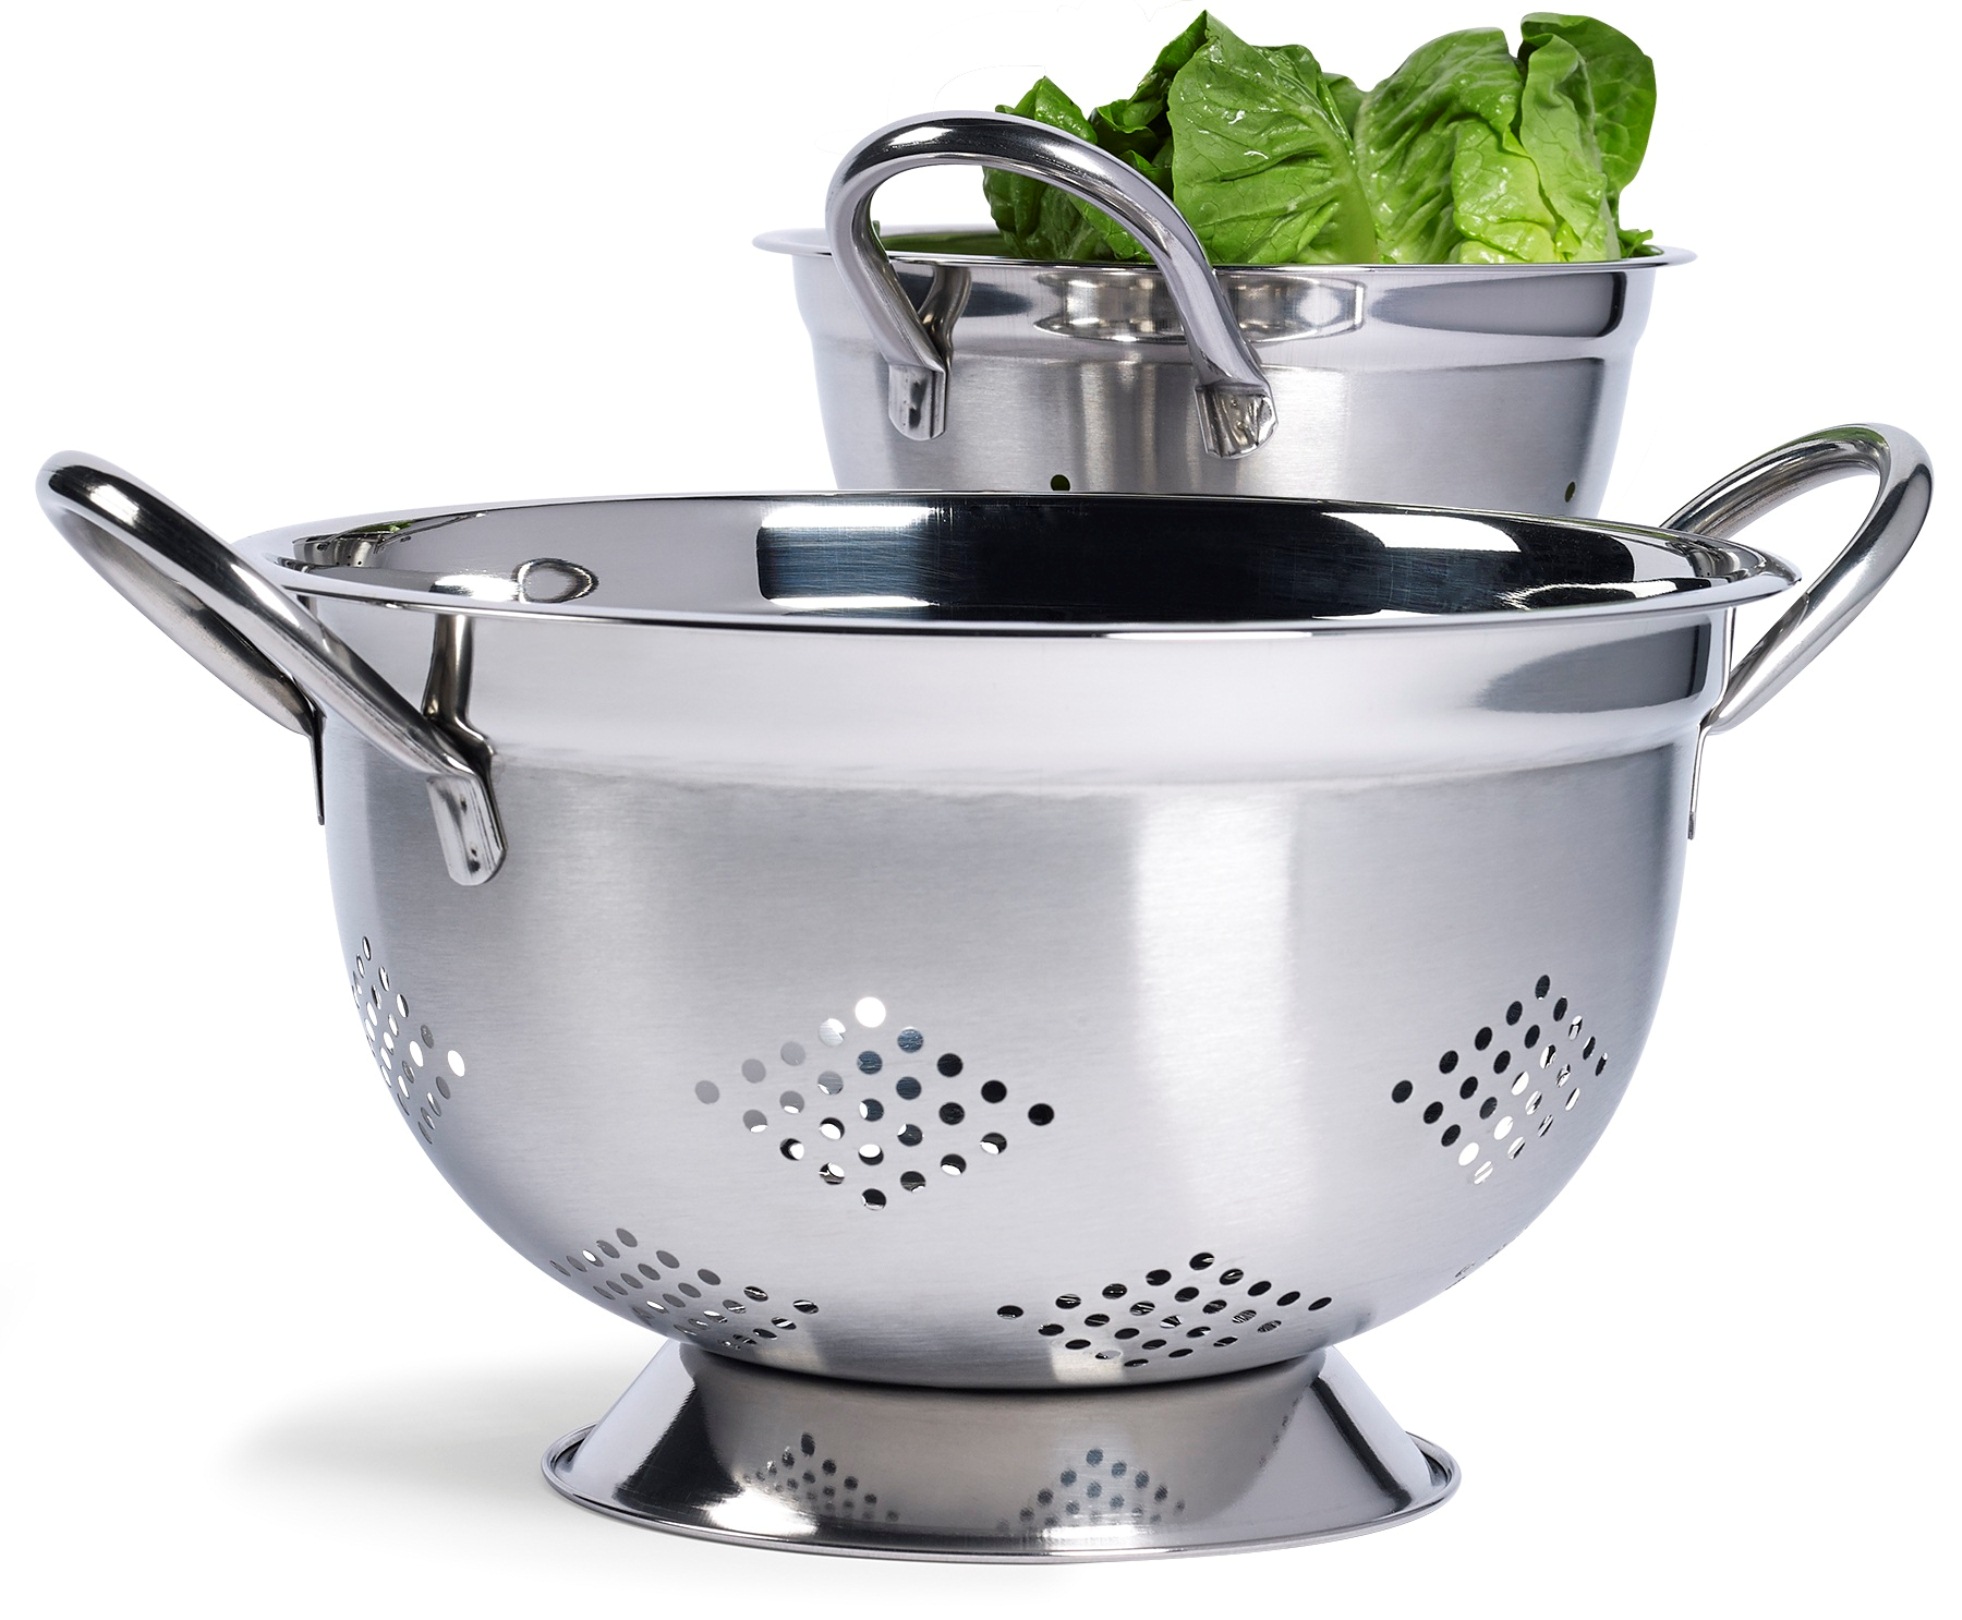 Cannon 2 pc. Colander Set - Stainless Steel